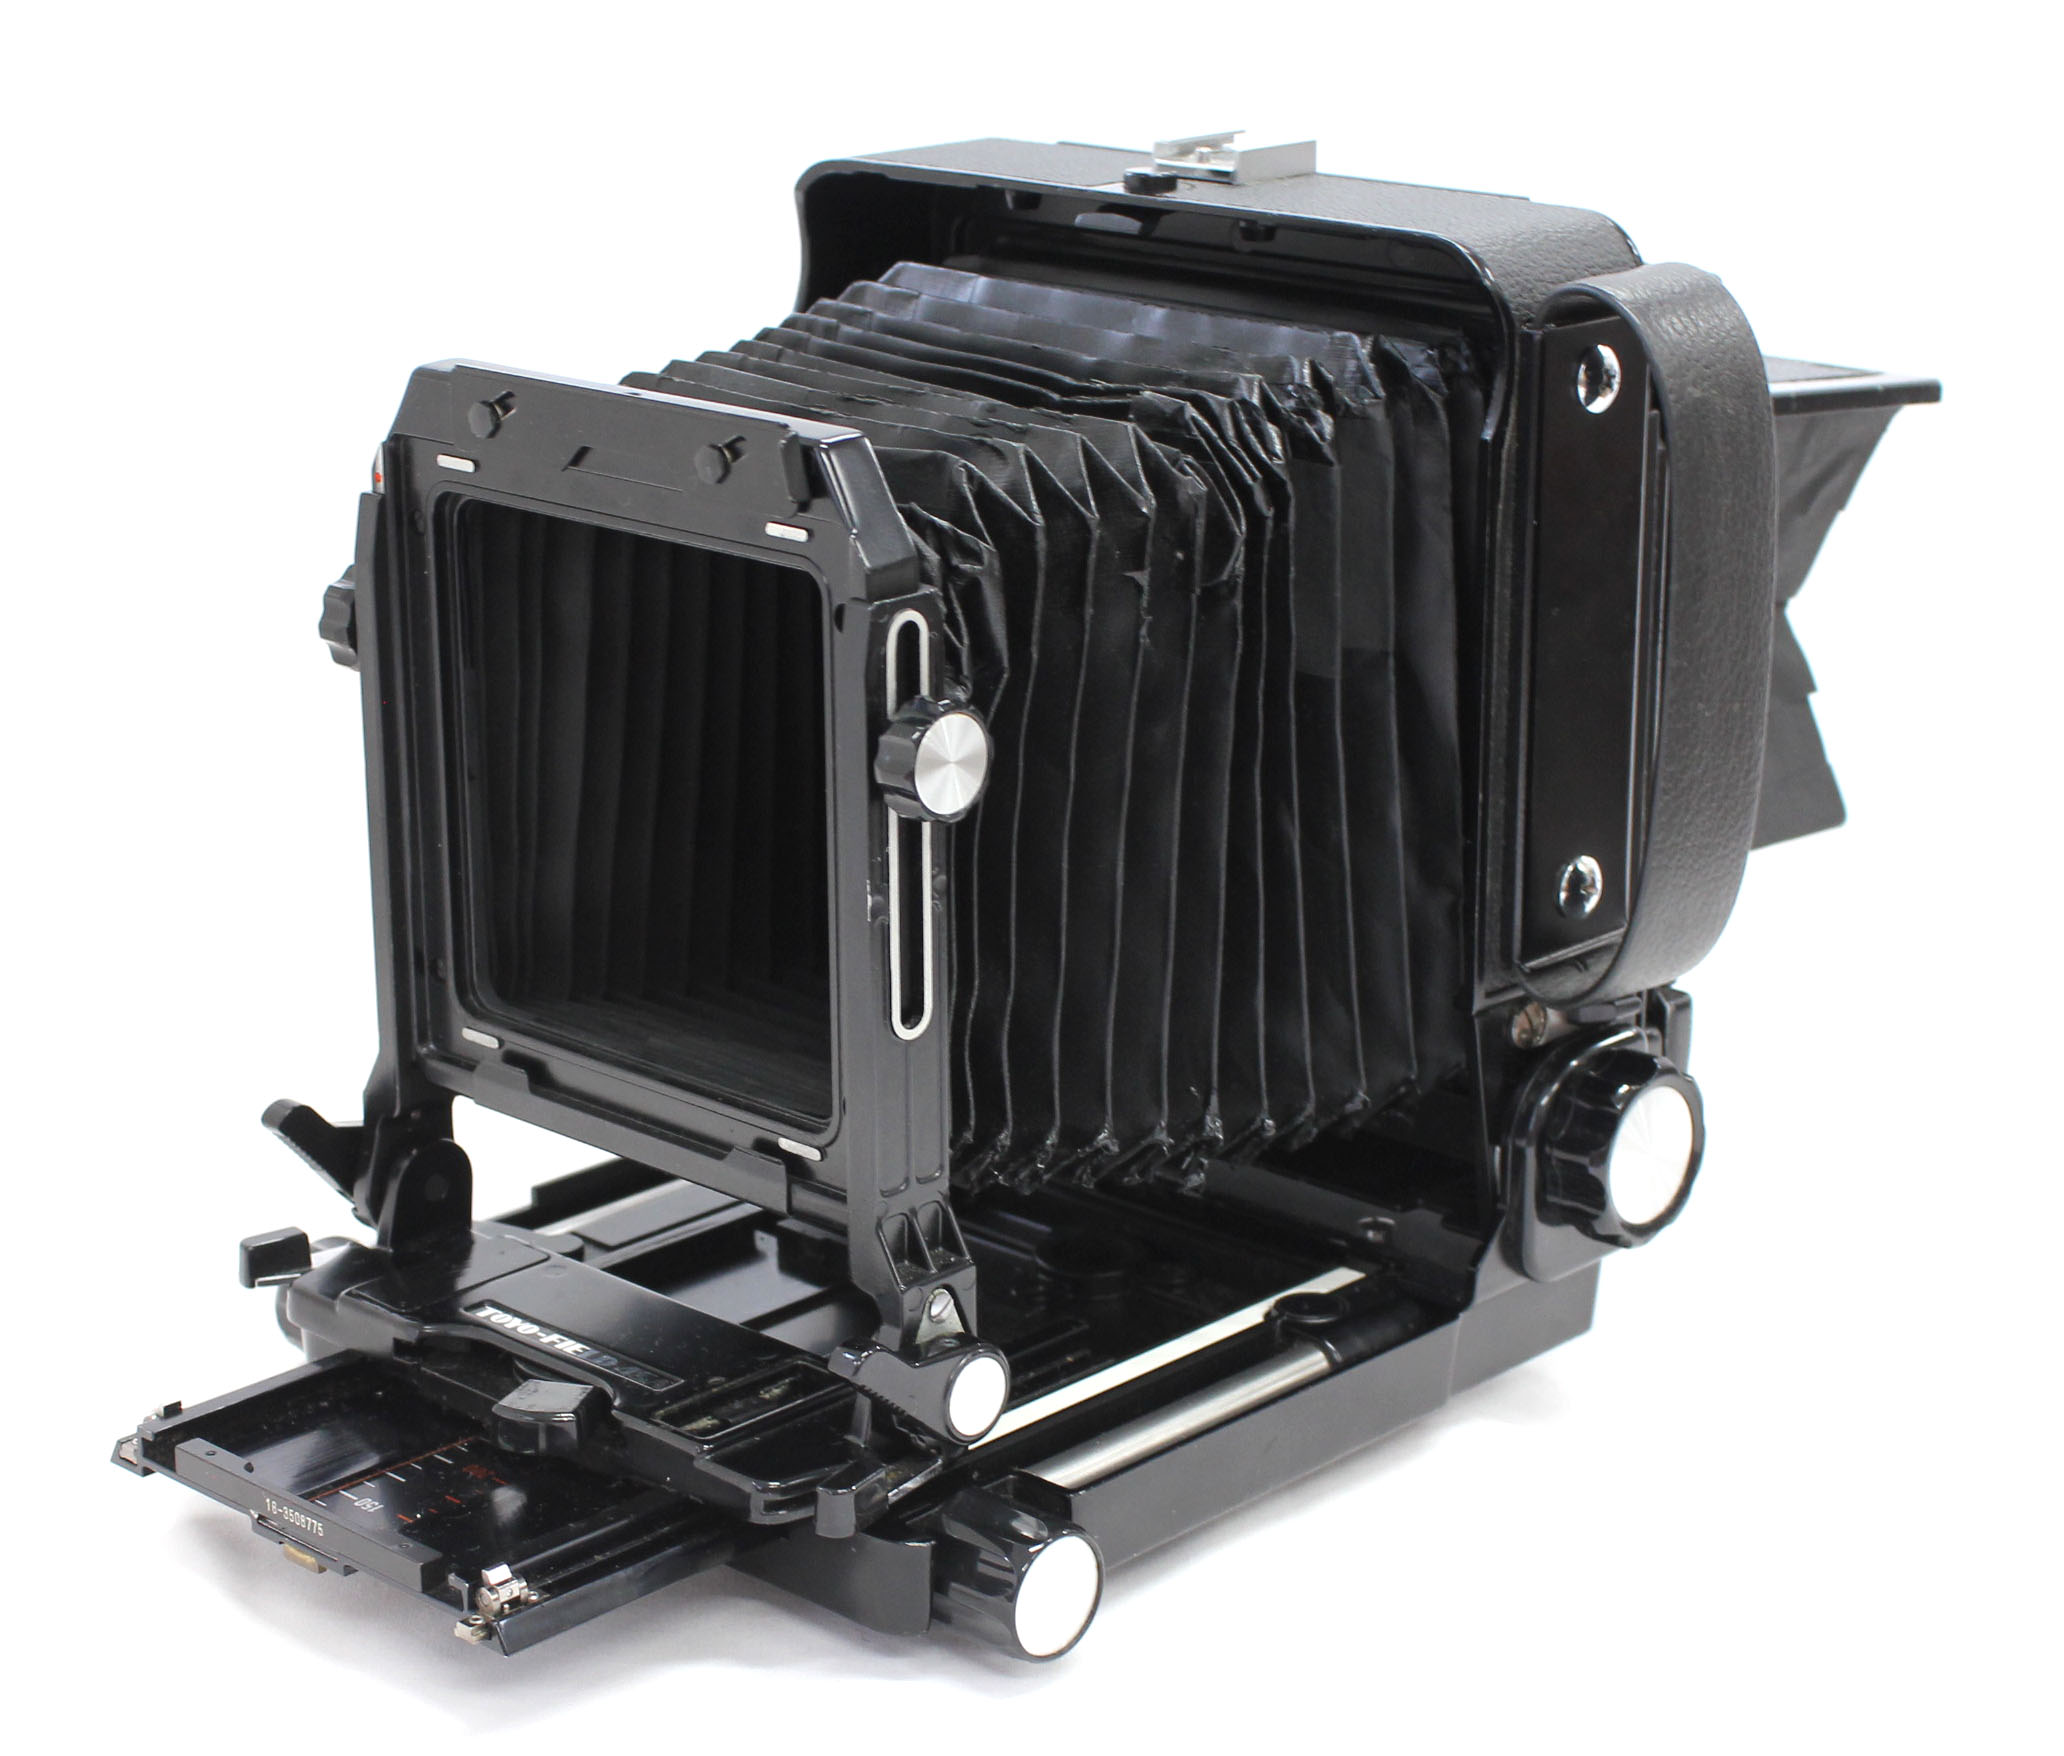 Japan Used Camera Shop | Toyo Field 45A 4x5 Large Format Film Camera with Revolving Back from Japan